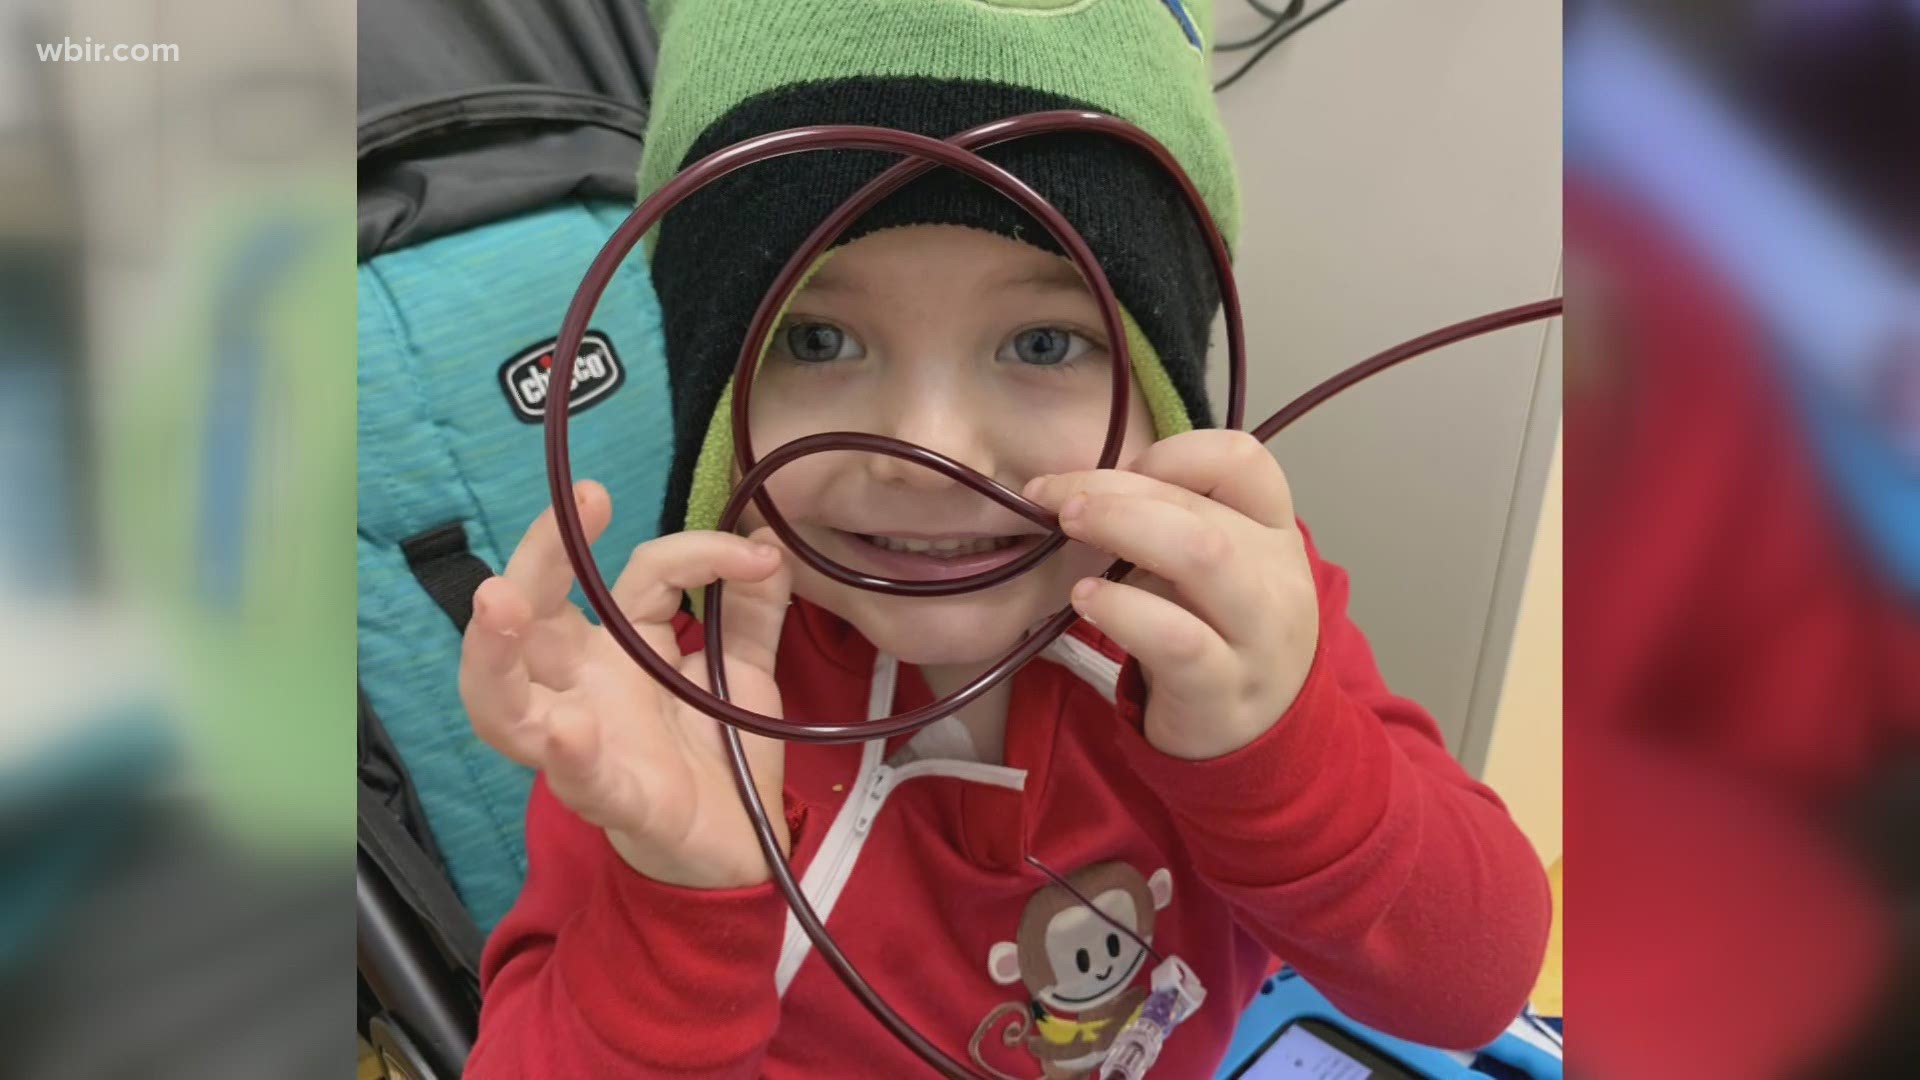 MORE THAN 11,000 CHILDREN ARE DIAGNOSED WITH CANCER EVERY YEAR, AND IN 2018, NOAH SILENO of Powell BECAME ONE OF THEM.